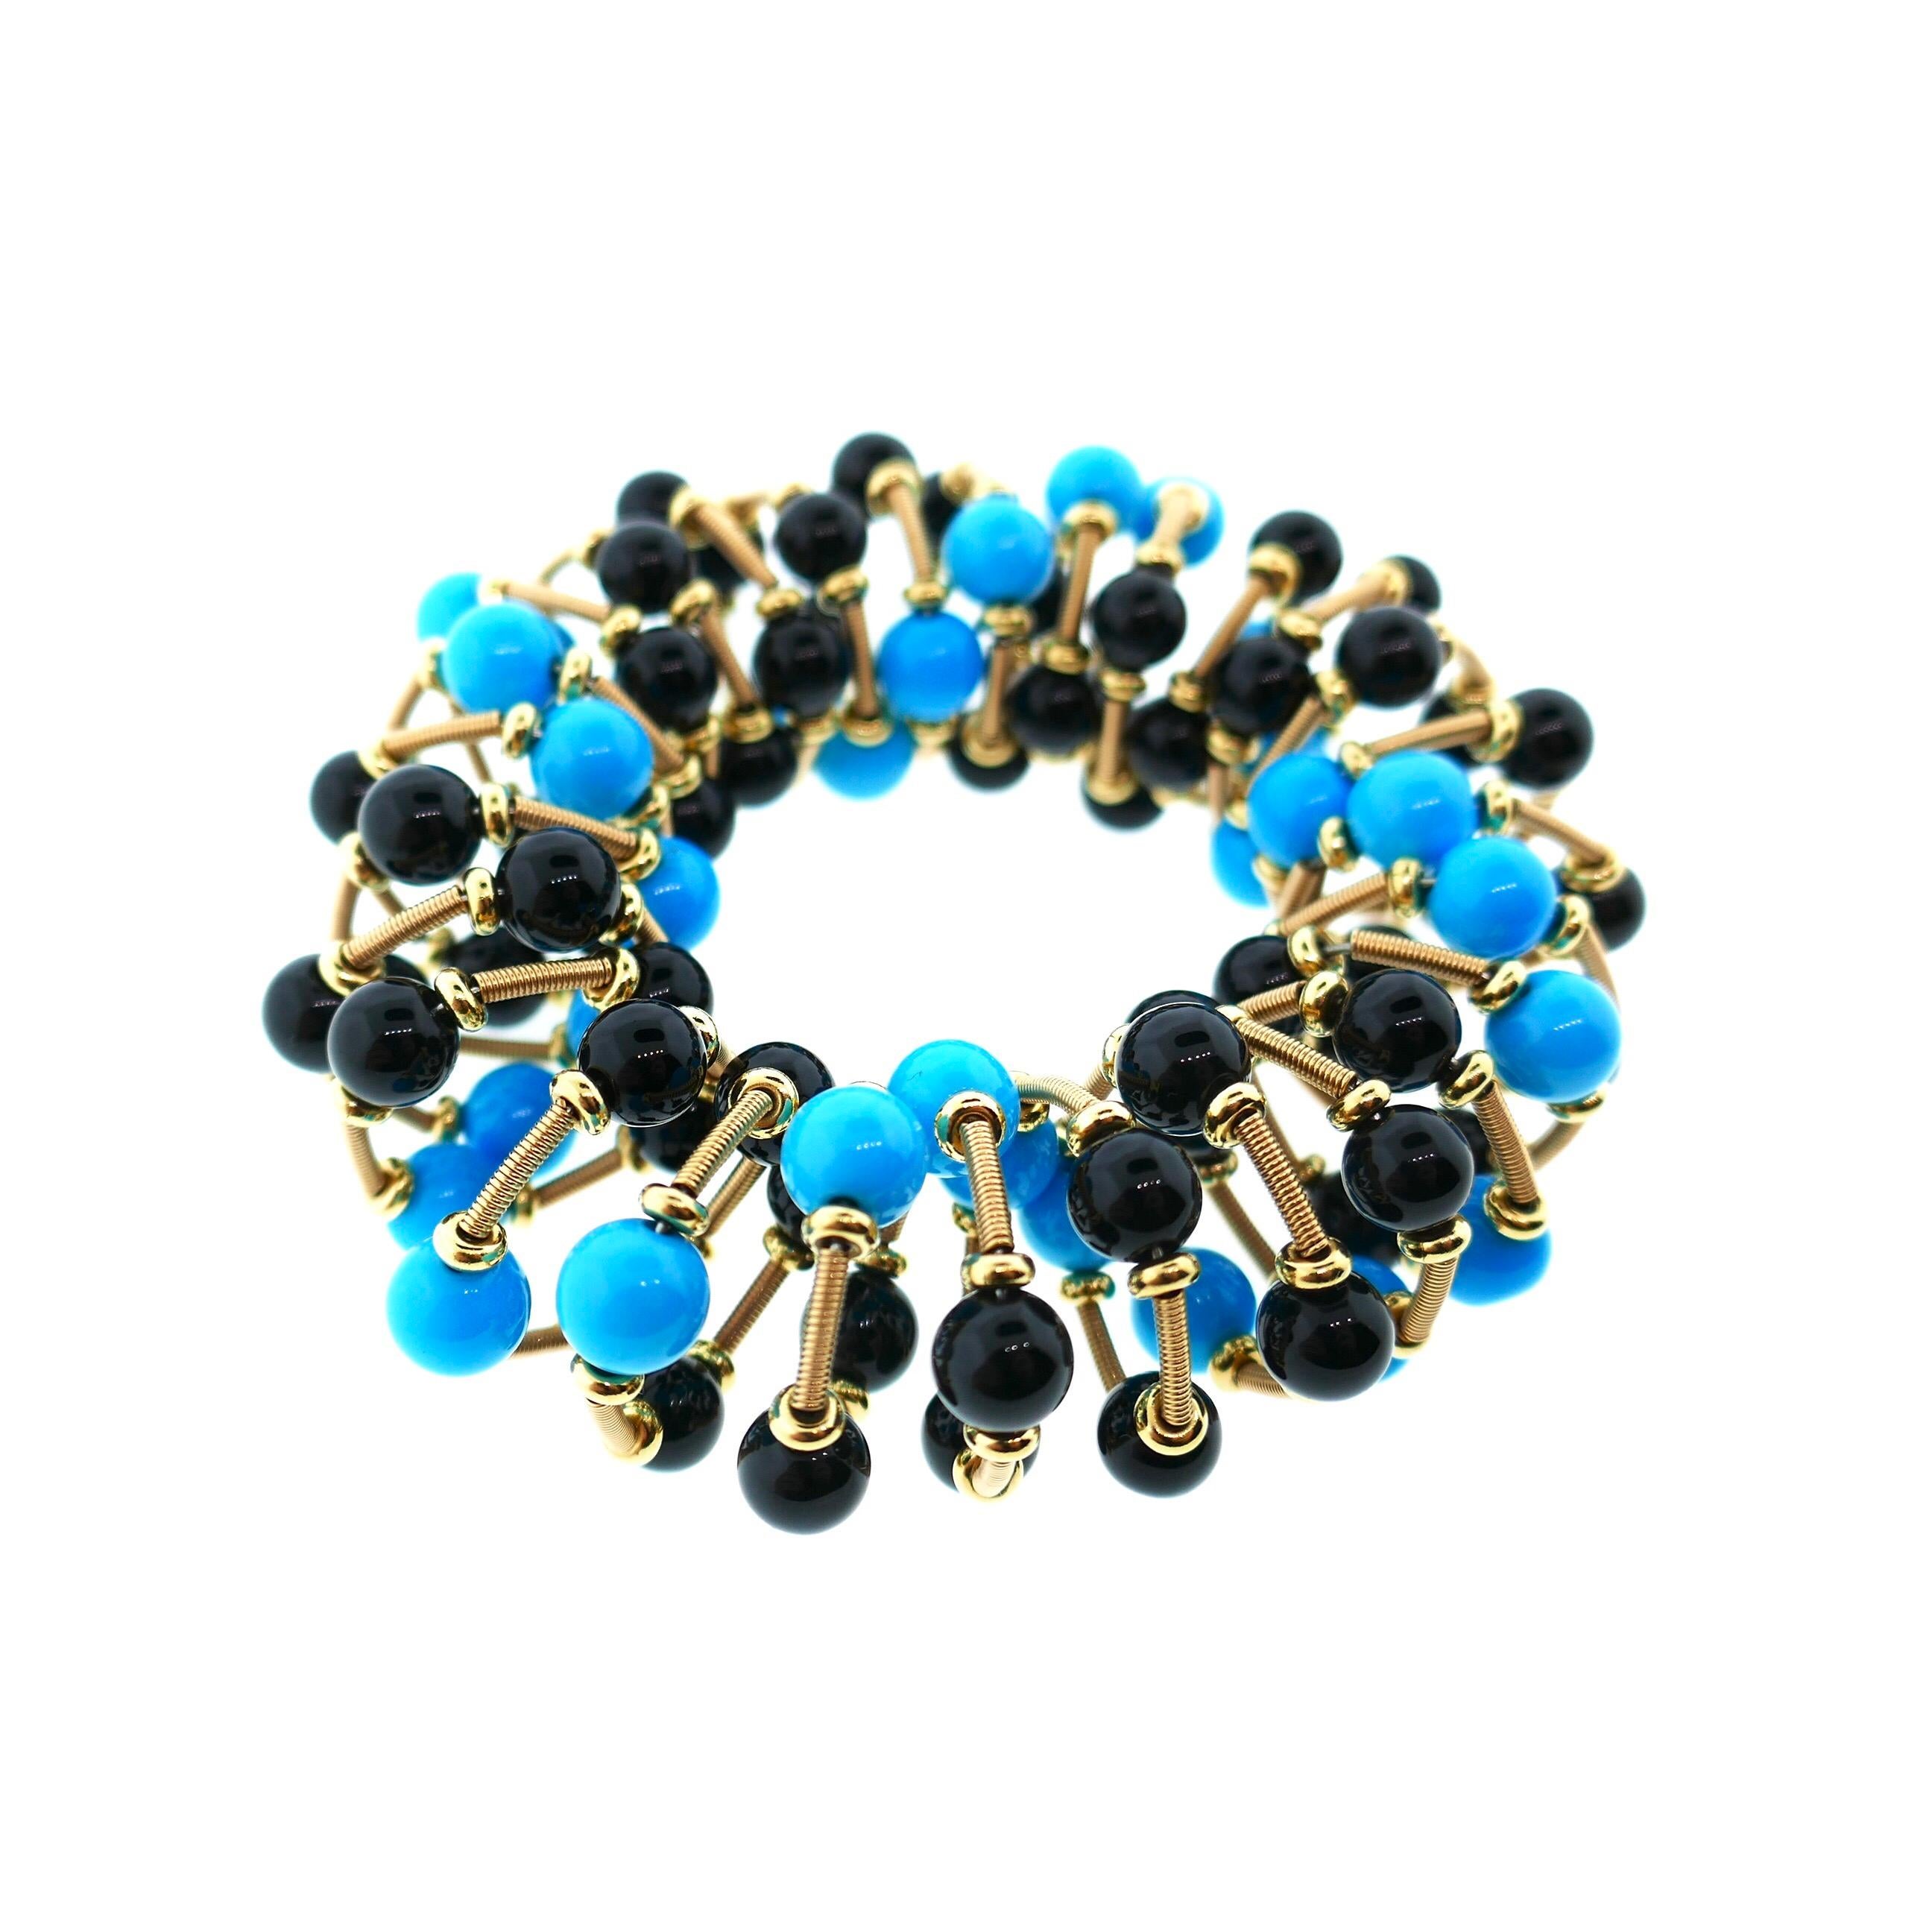 Italian 18 Karat Yellow Gold Turquoise and Onyx Scrunchie Bracelet

This is a one of a kind Italian bracelet. The design incorporates springs so it stretches like a scrunchie and  can accommodate any size wrist. The workmanship is amazing as is the